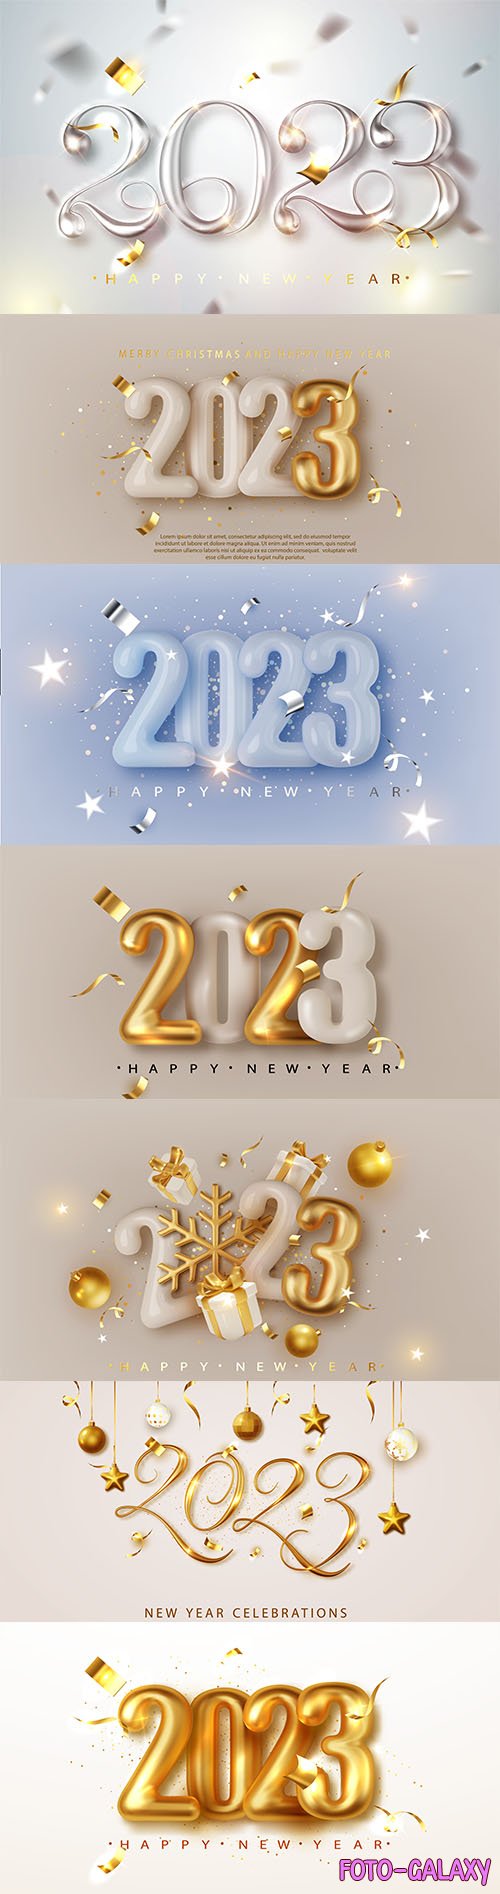 Happy new year 2023 golden numbers with ribbons and confetti